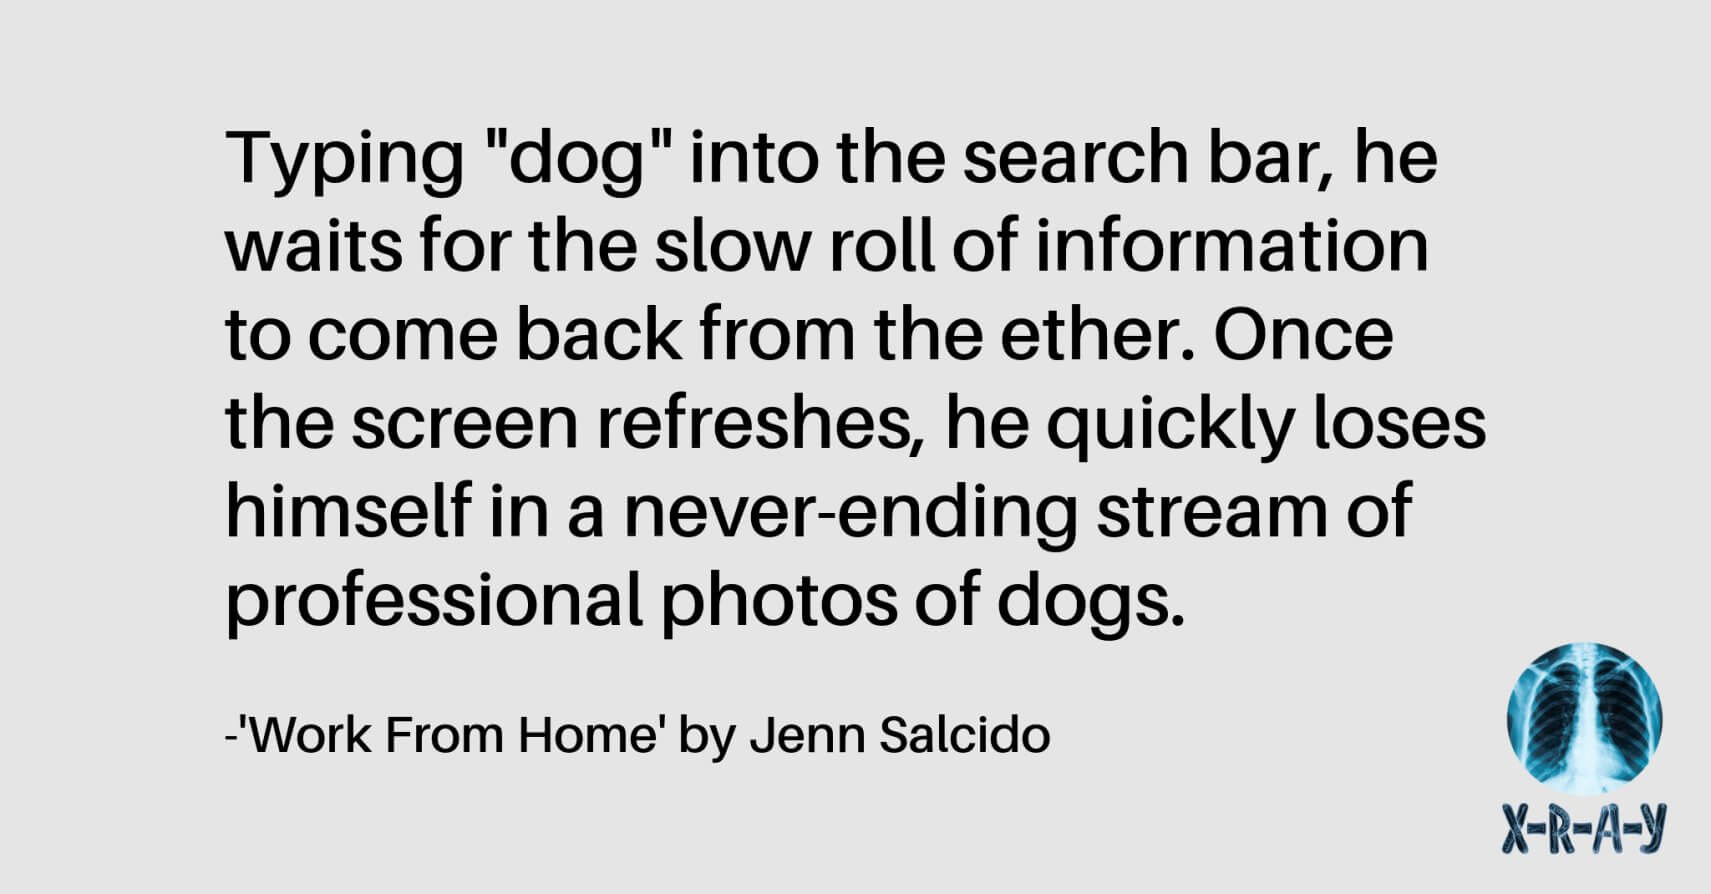 WORK FROM HOME by Jenn Salcido